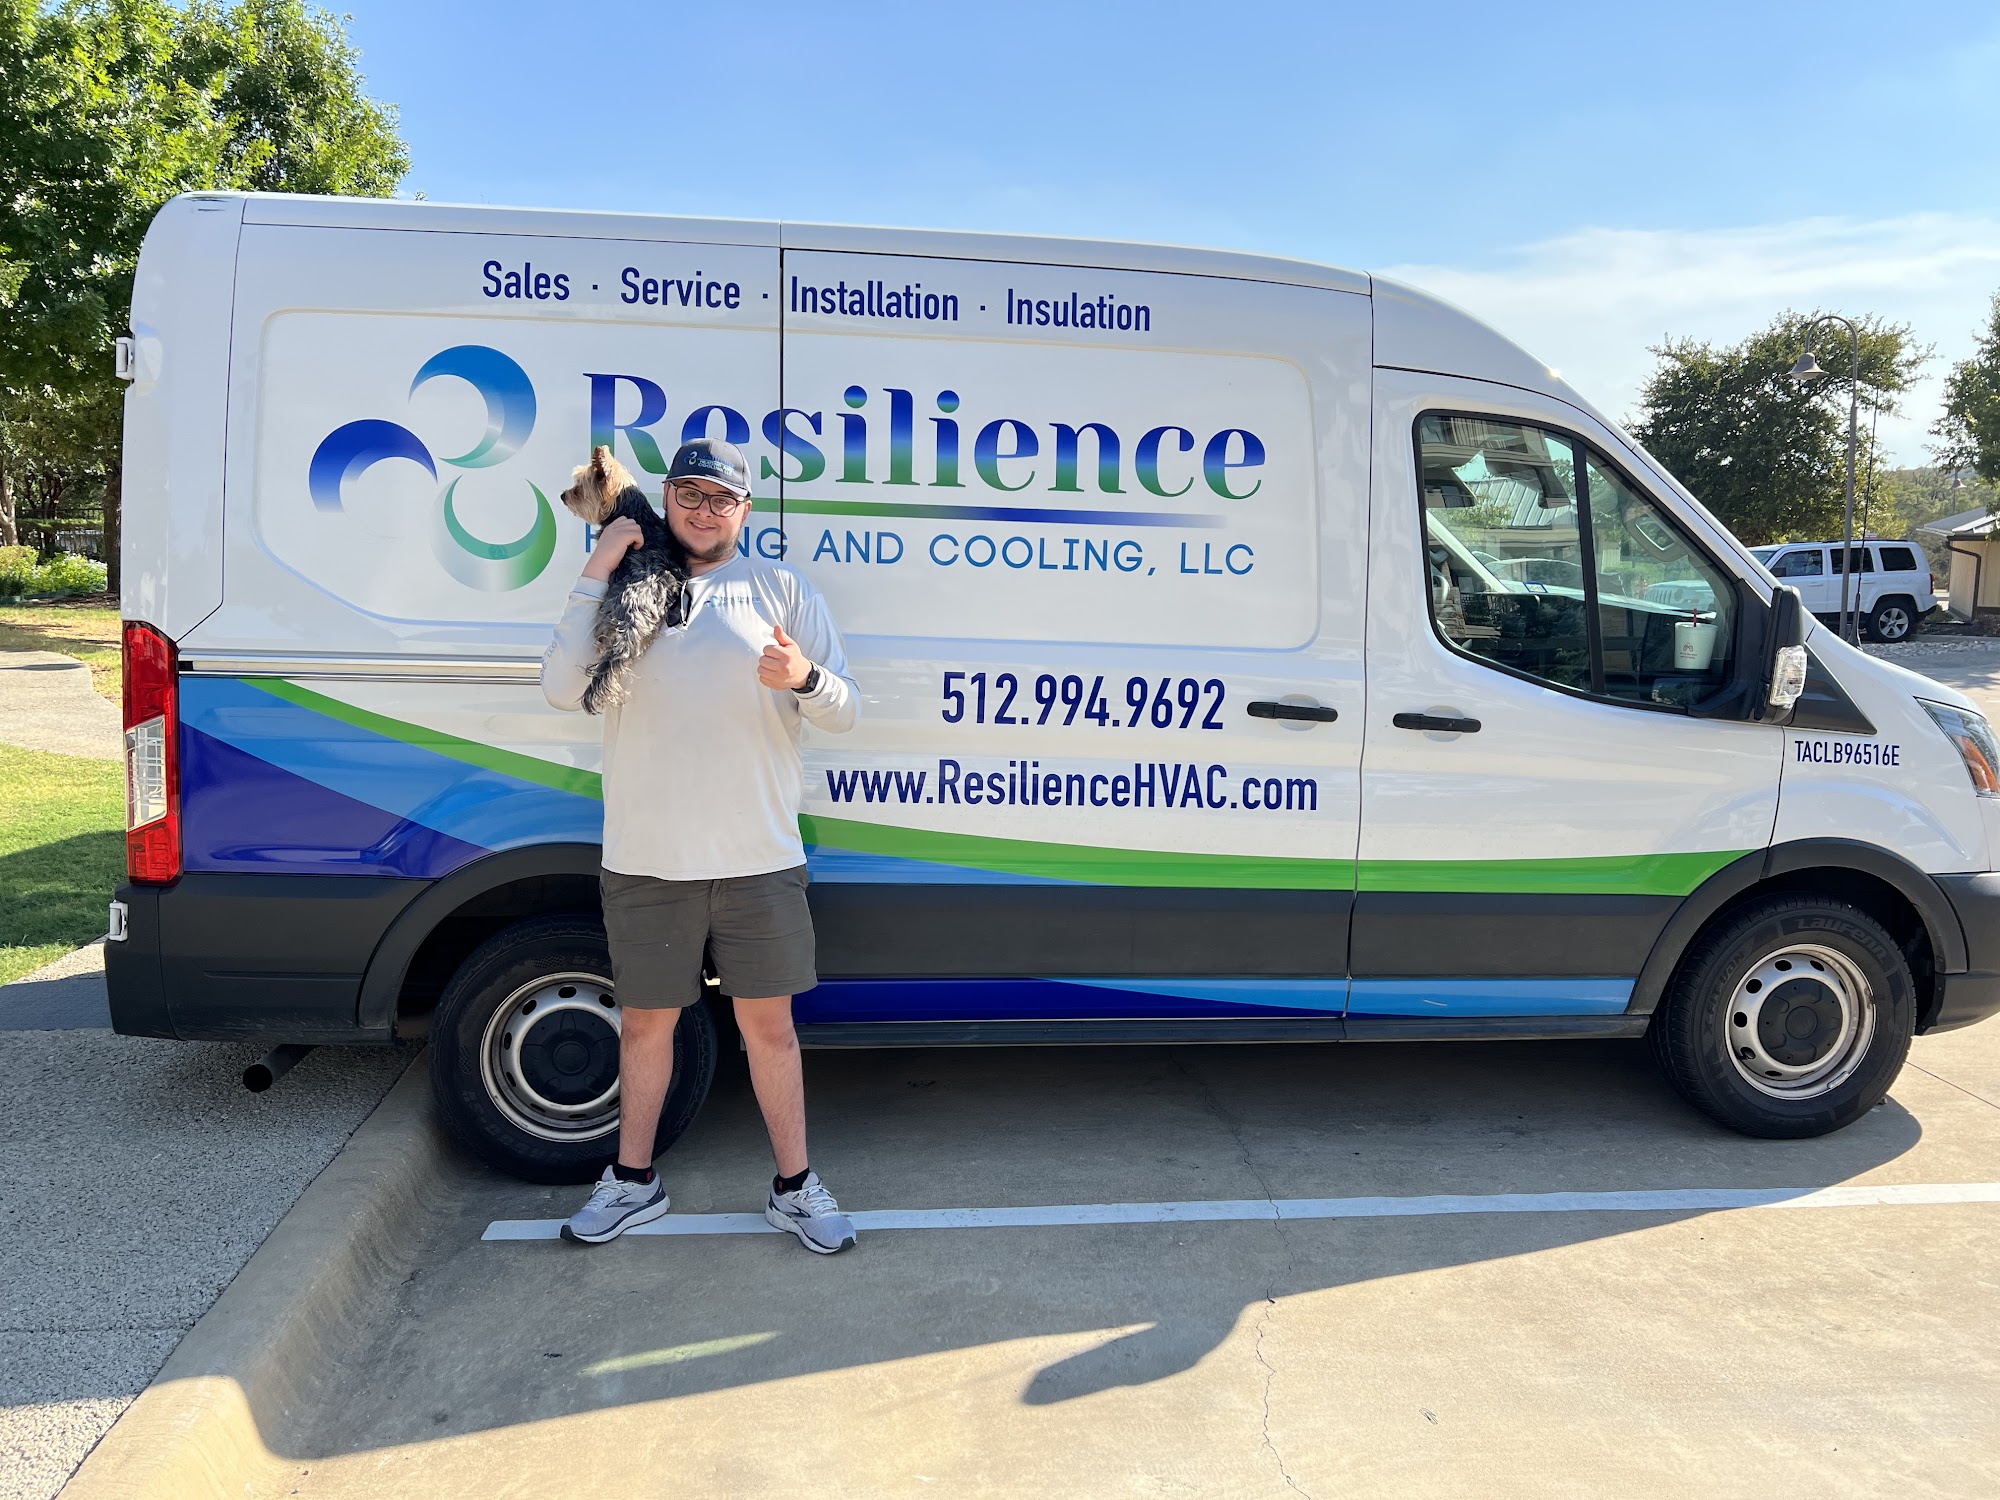 Resilience Heating and Cooling, LLC